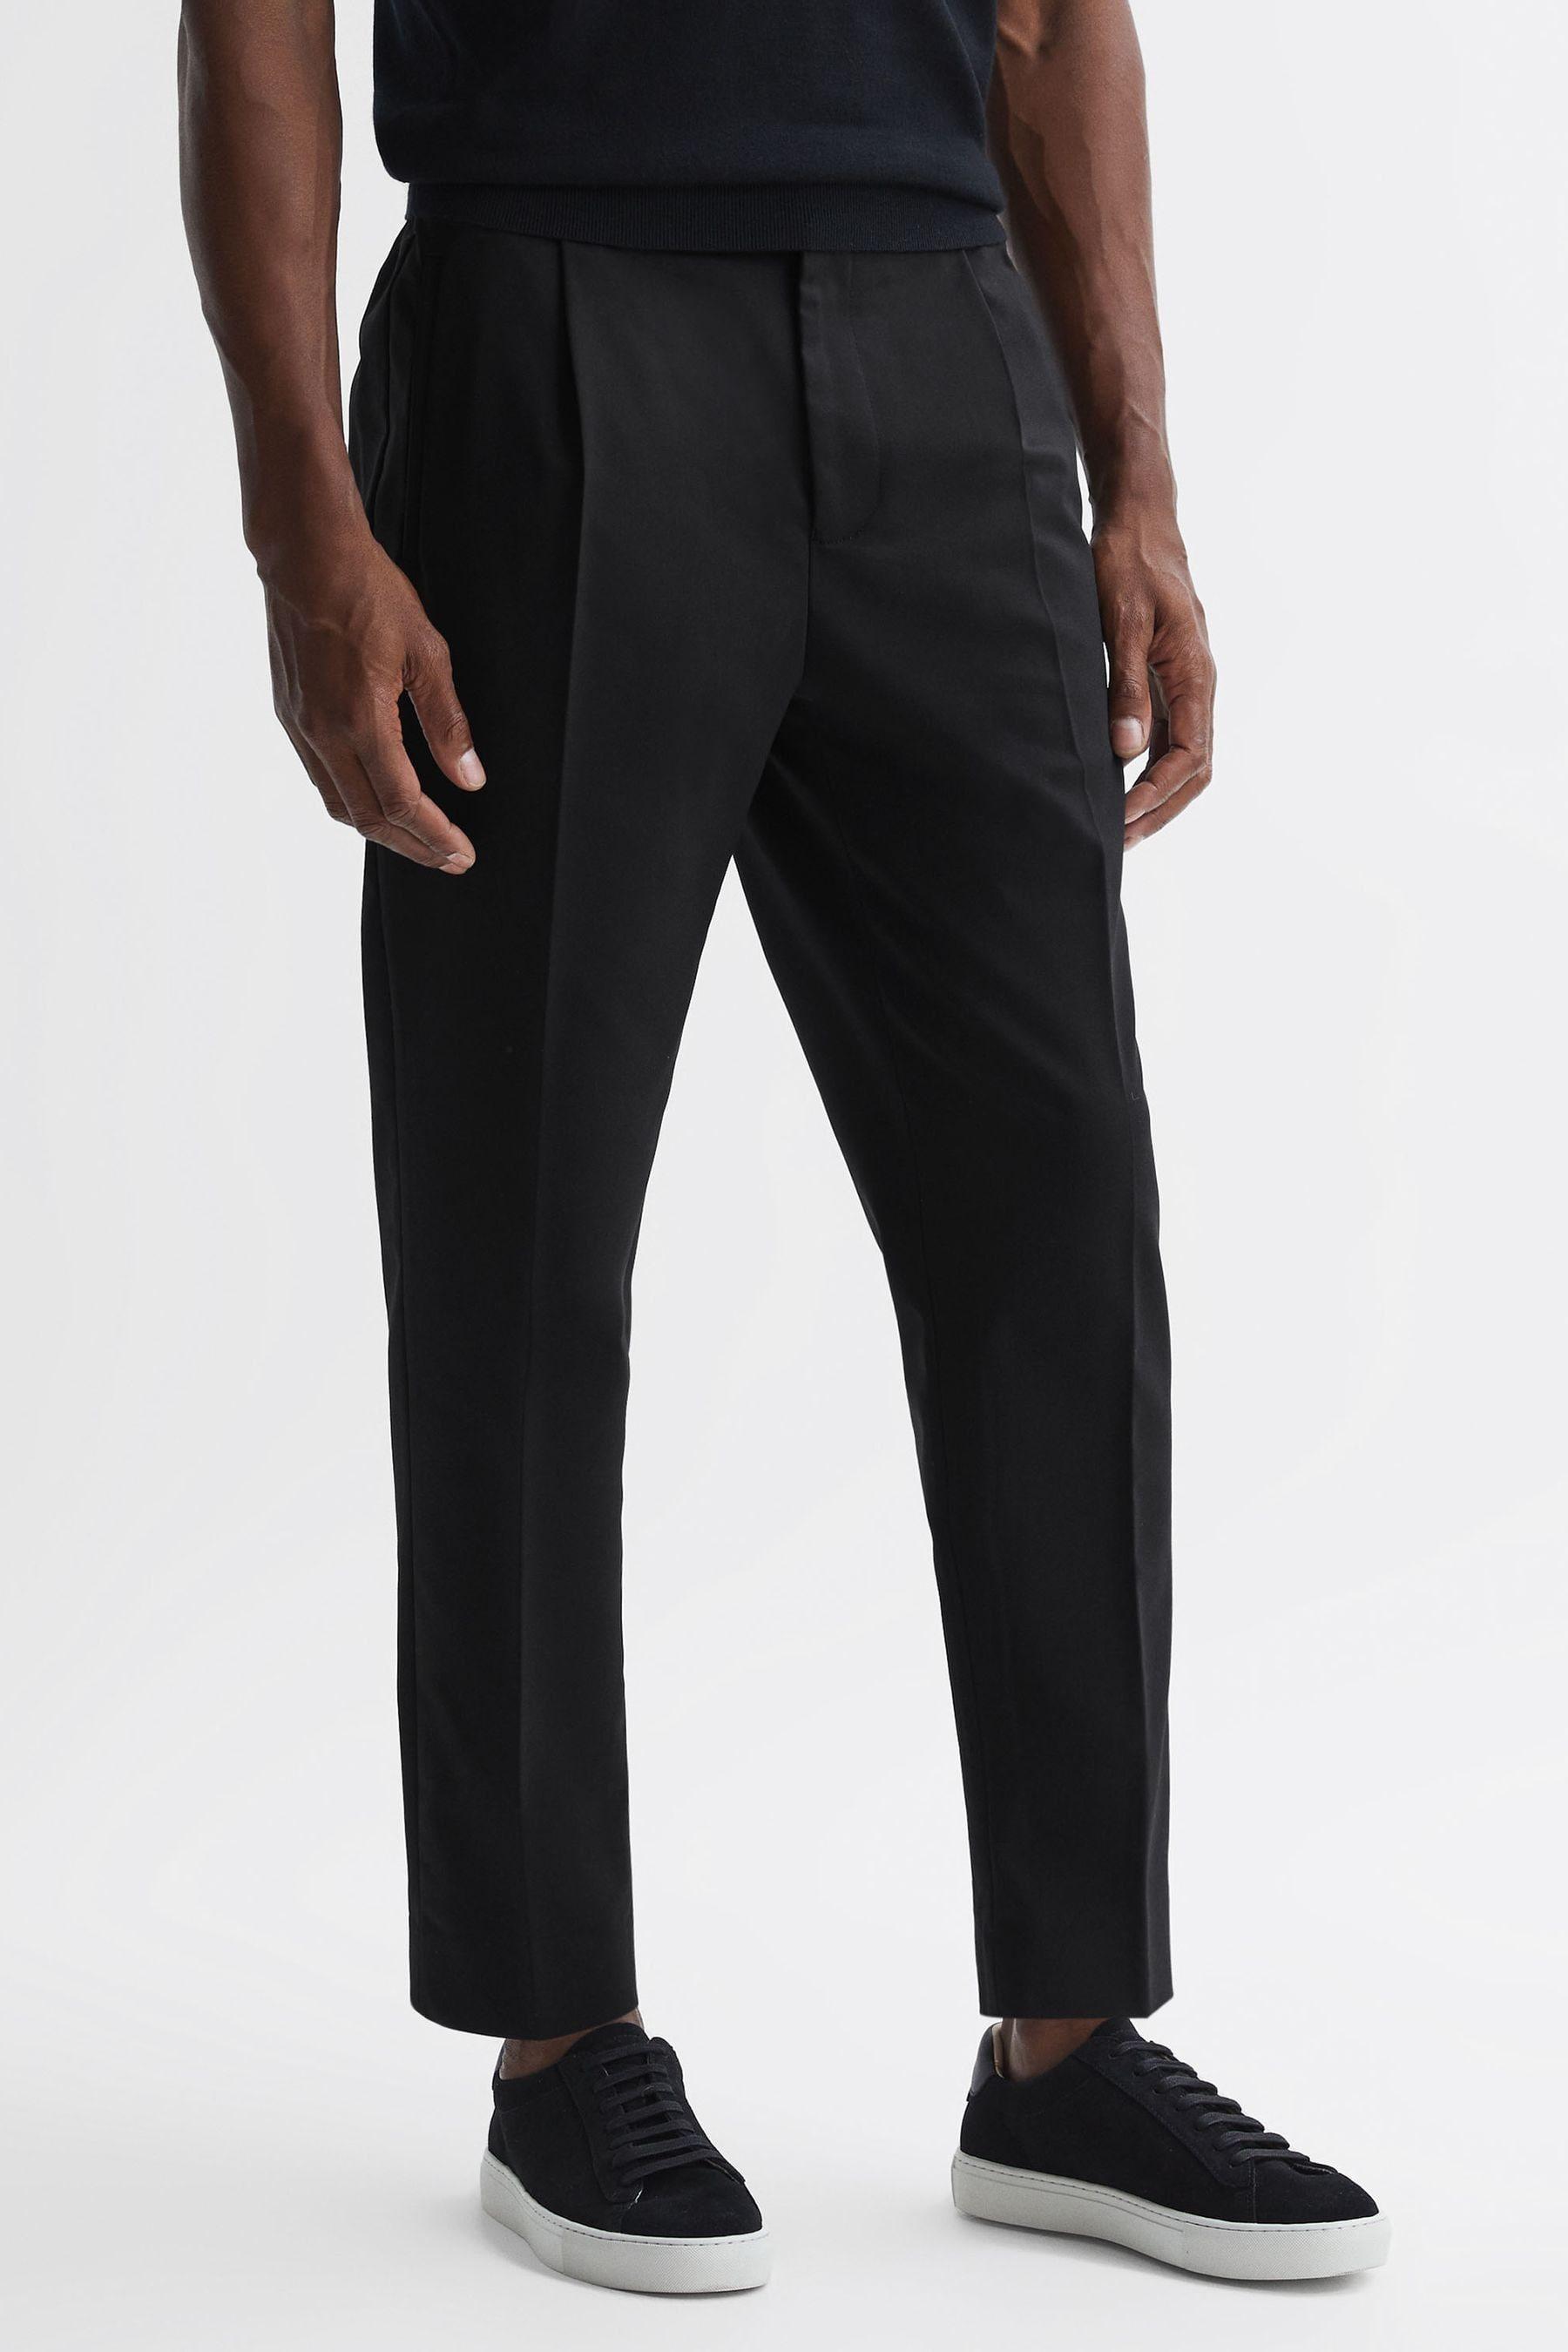 Reiss Hove - Black Technical Elasticated Trousers for Men | Lyst